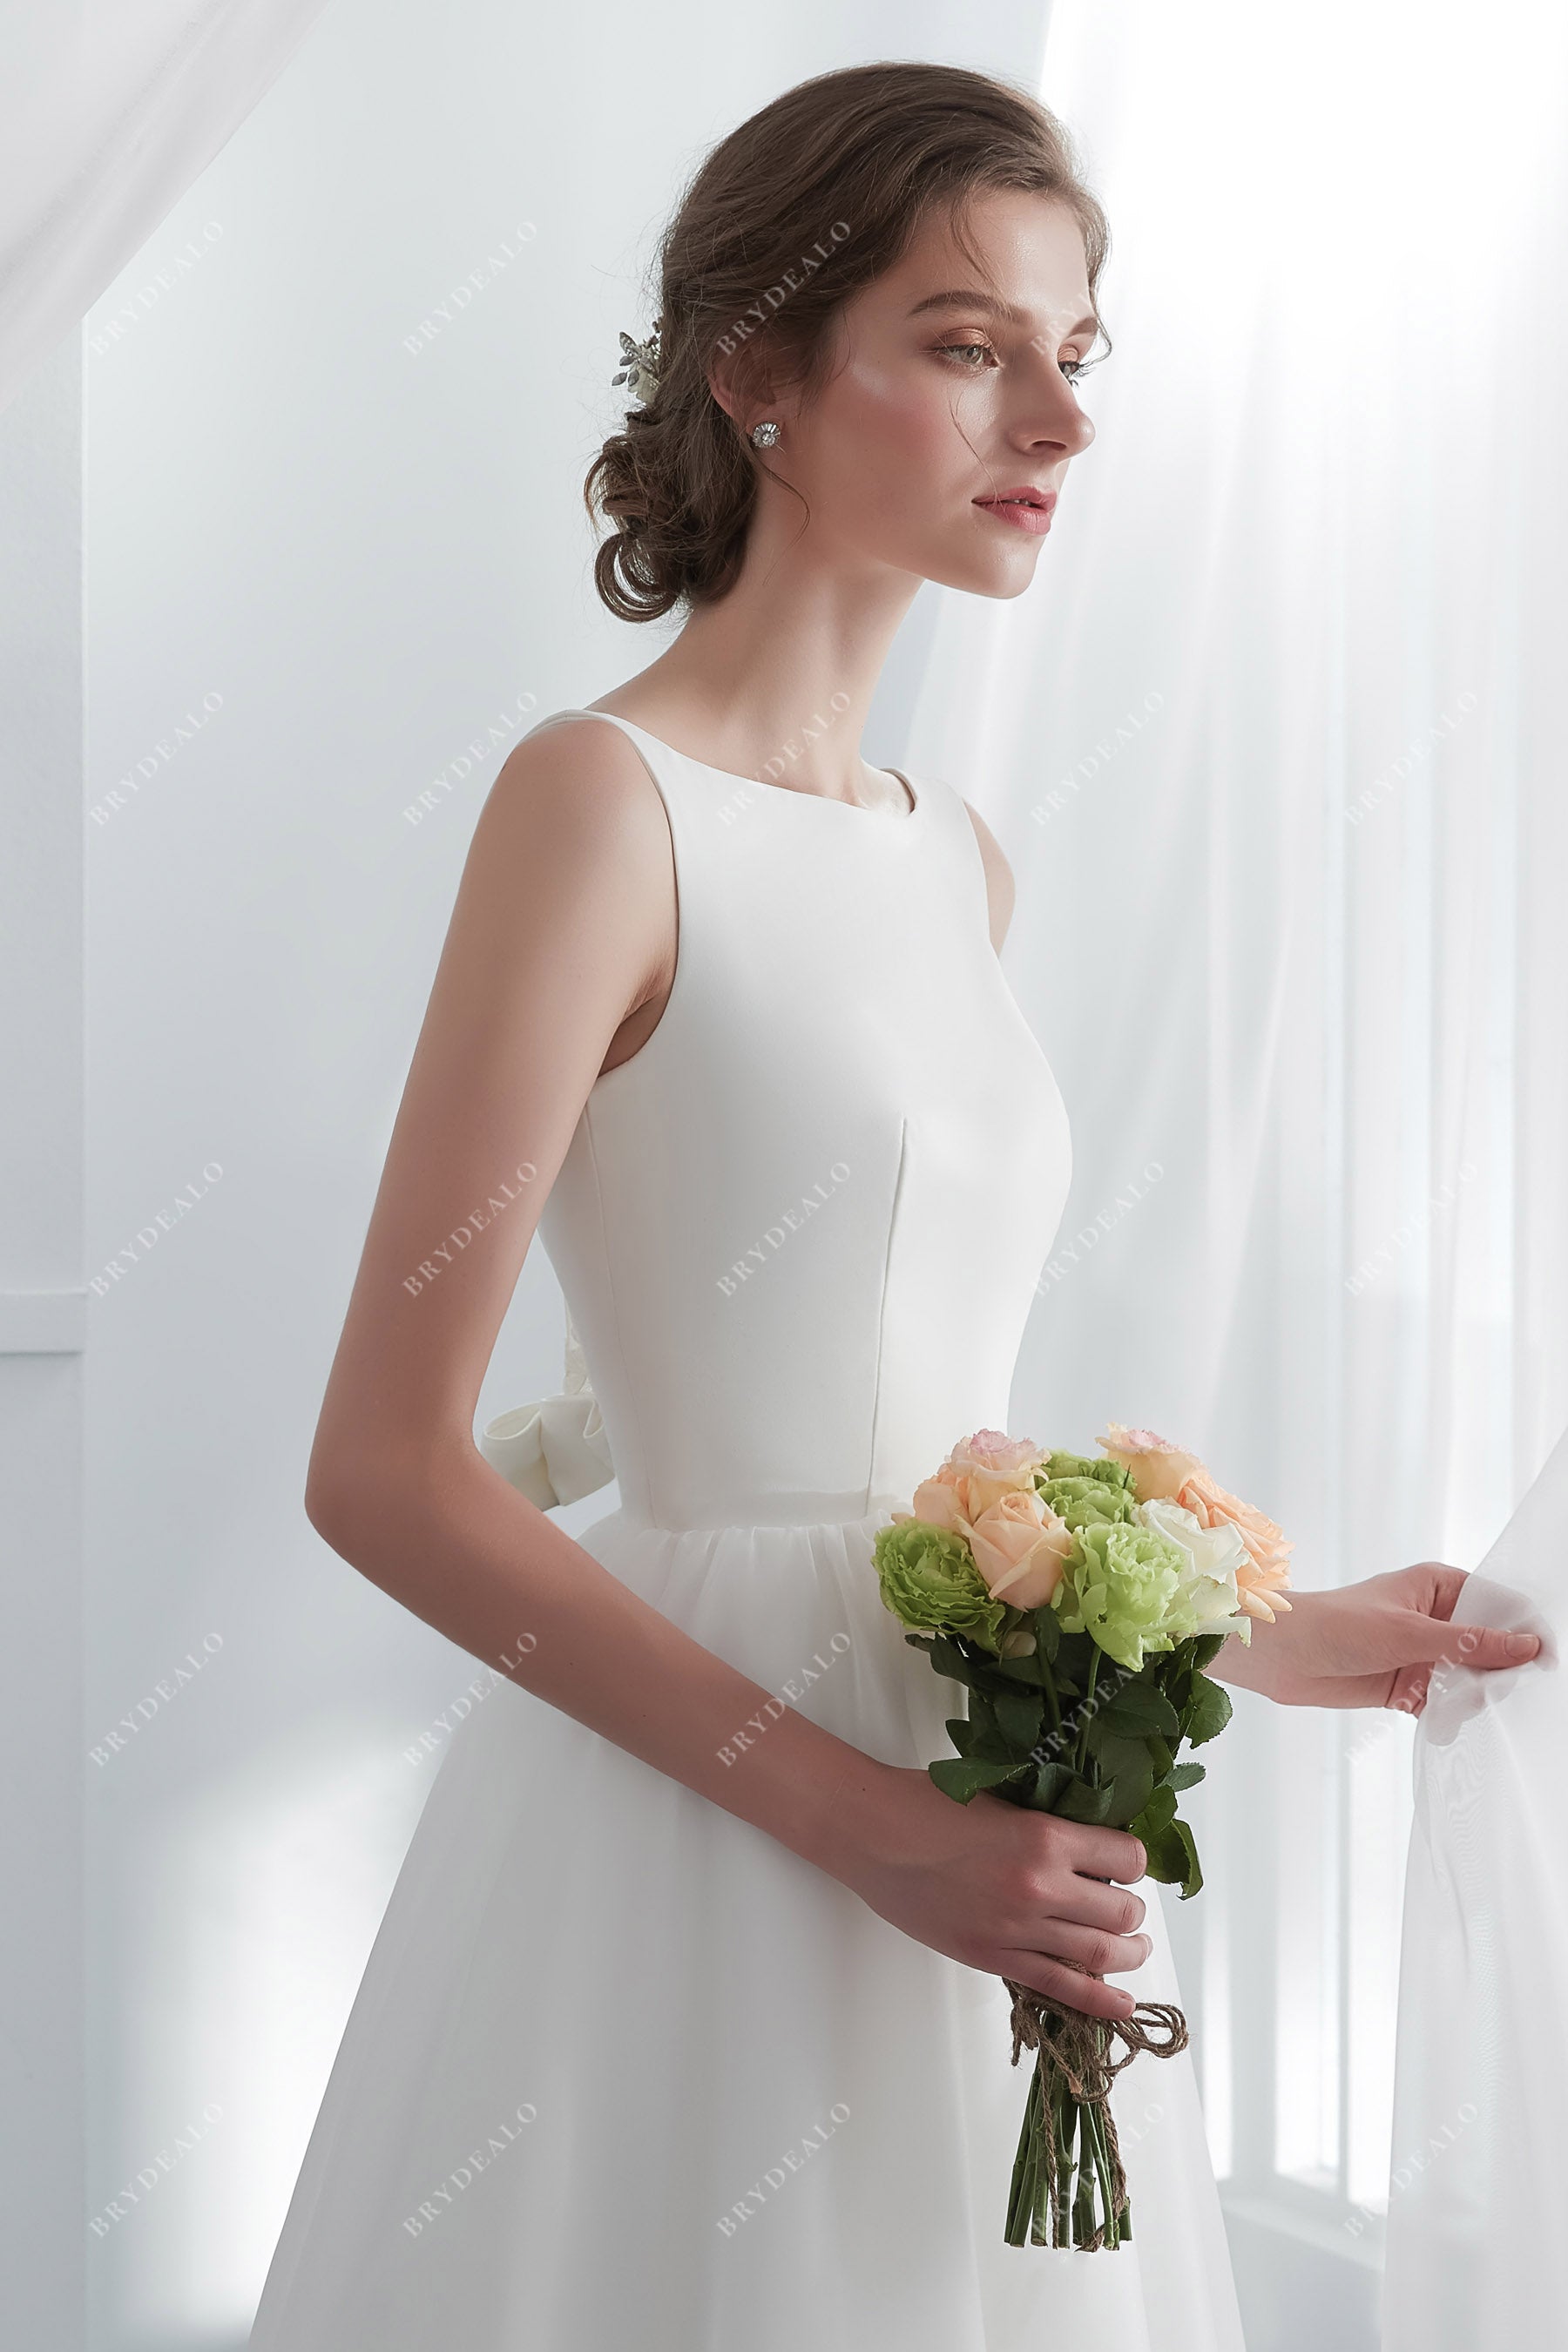 Private Label Sleeveless Crepe Bridal Gown